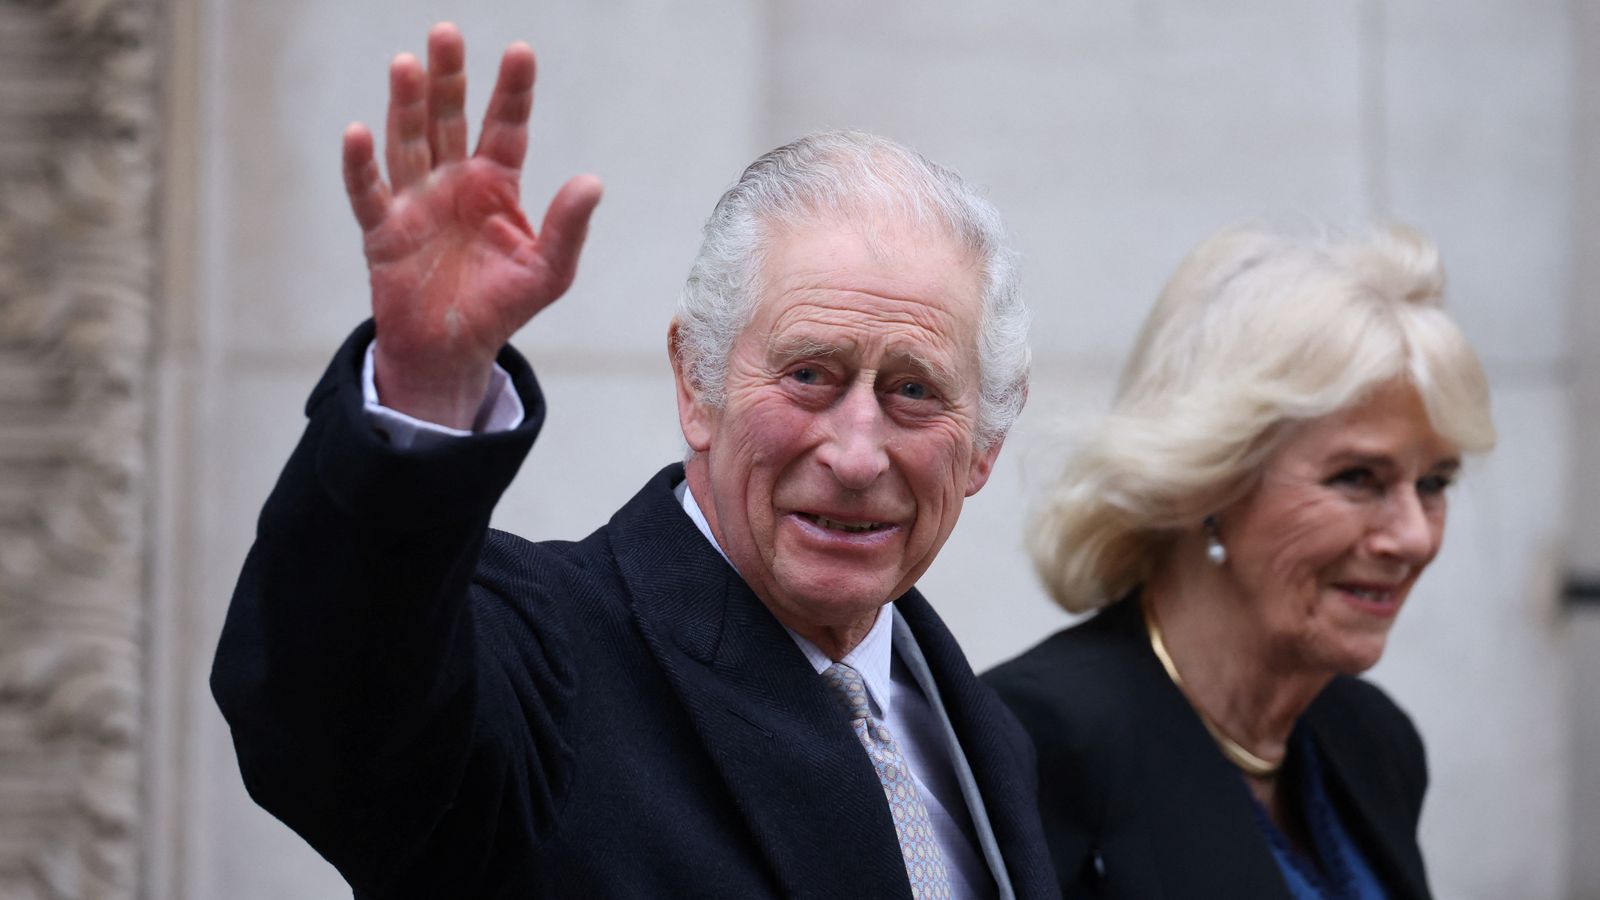 The King leaves hospital after three-night stay following prostate treatment